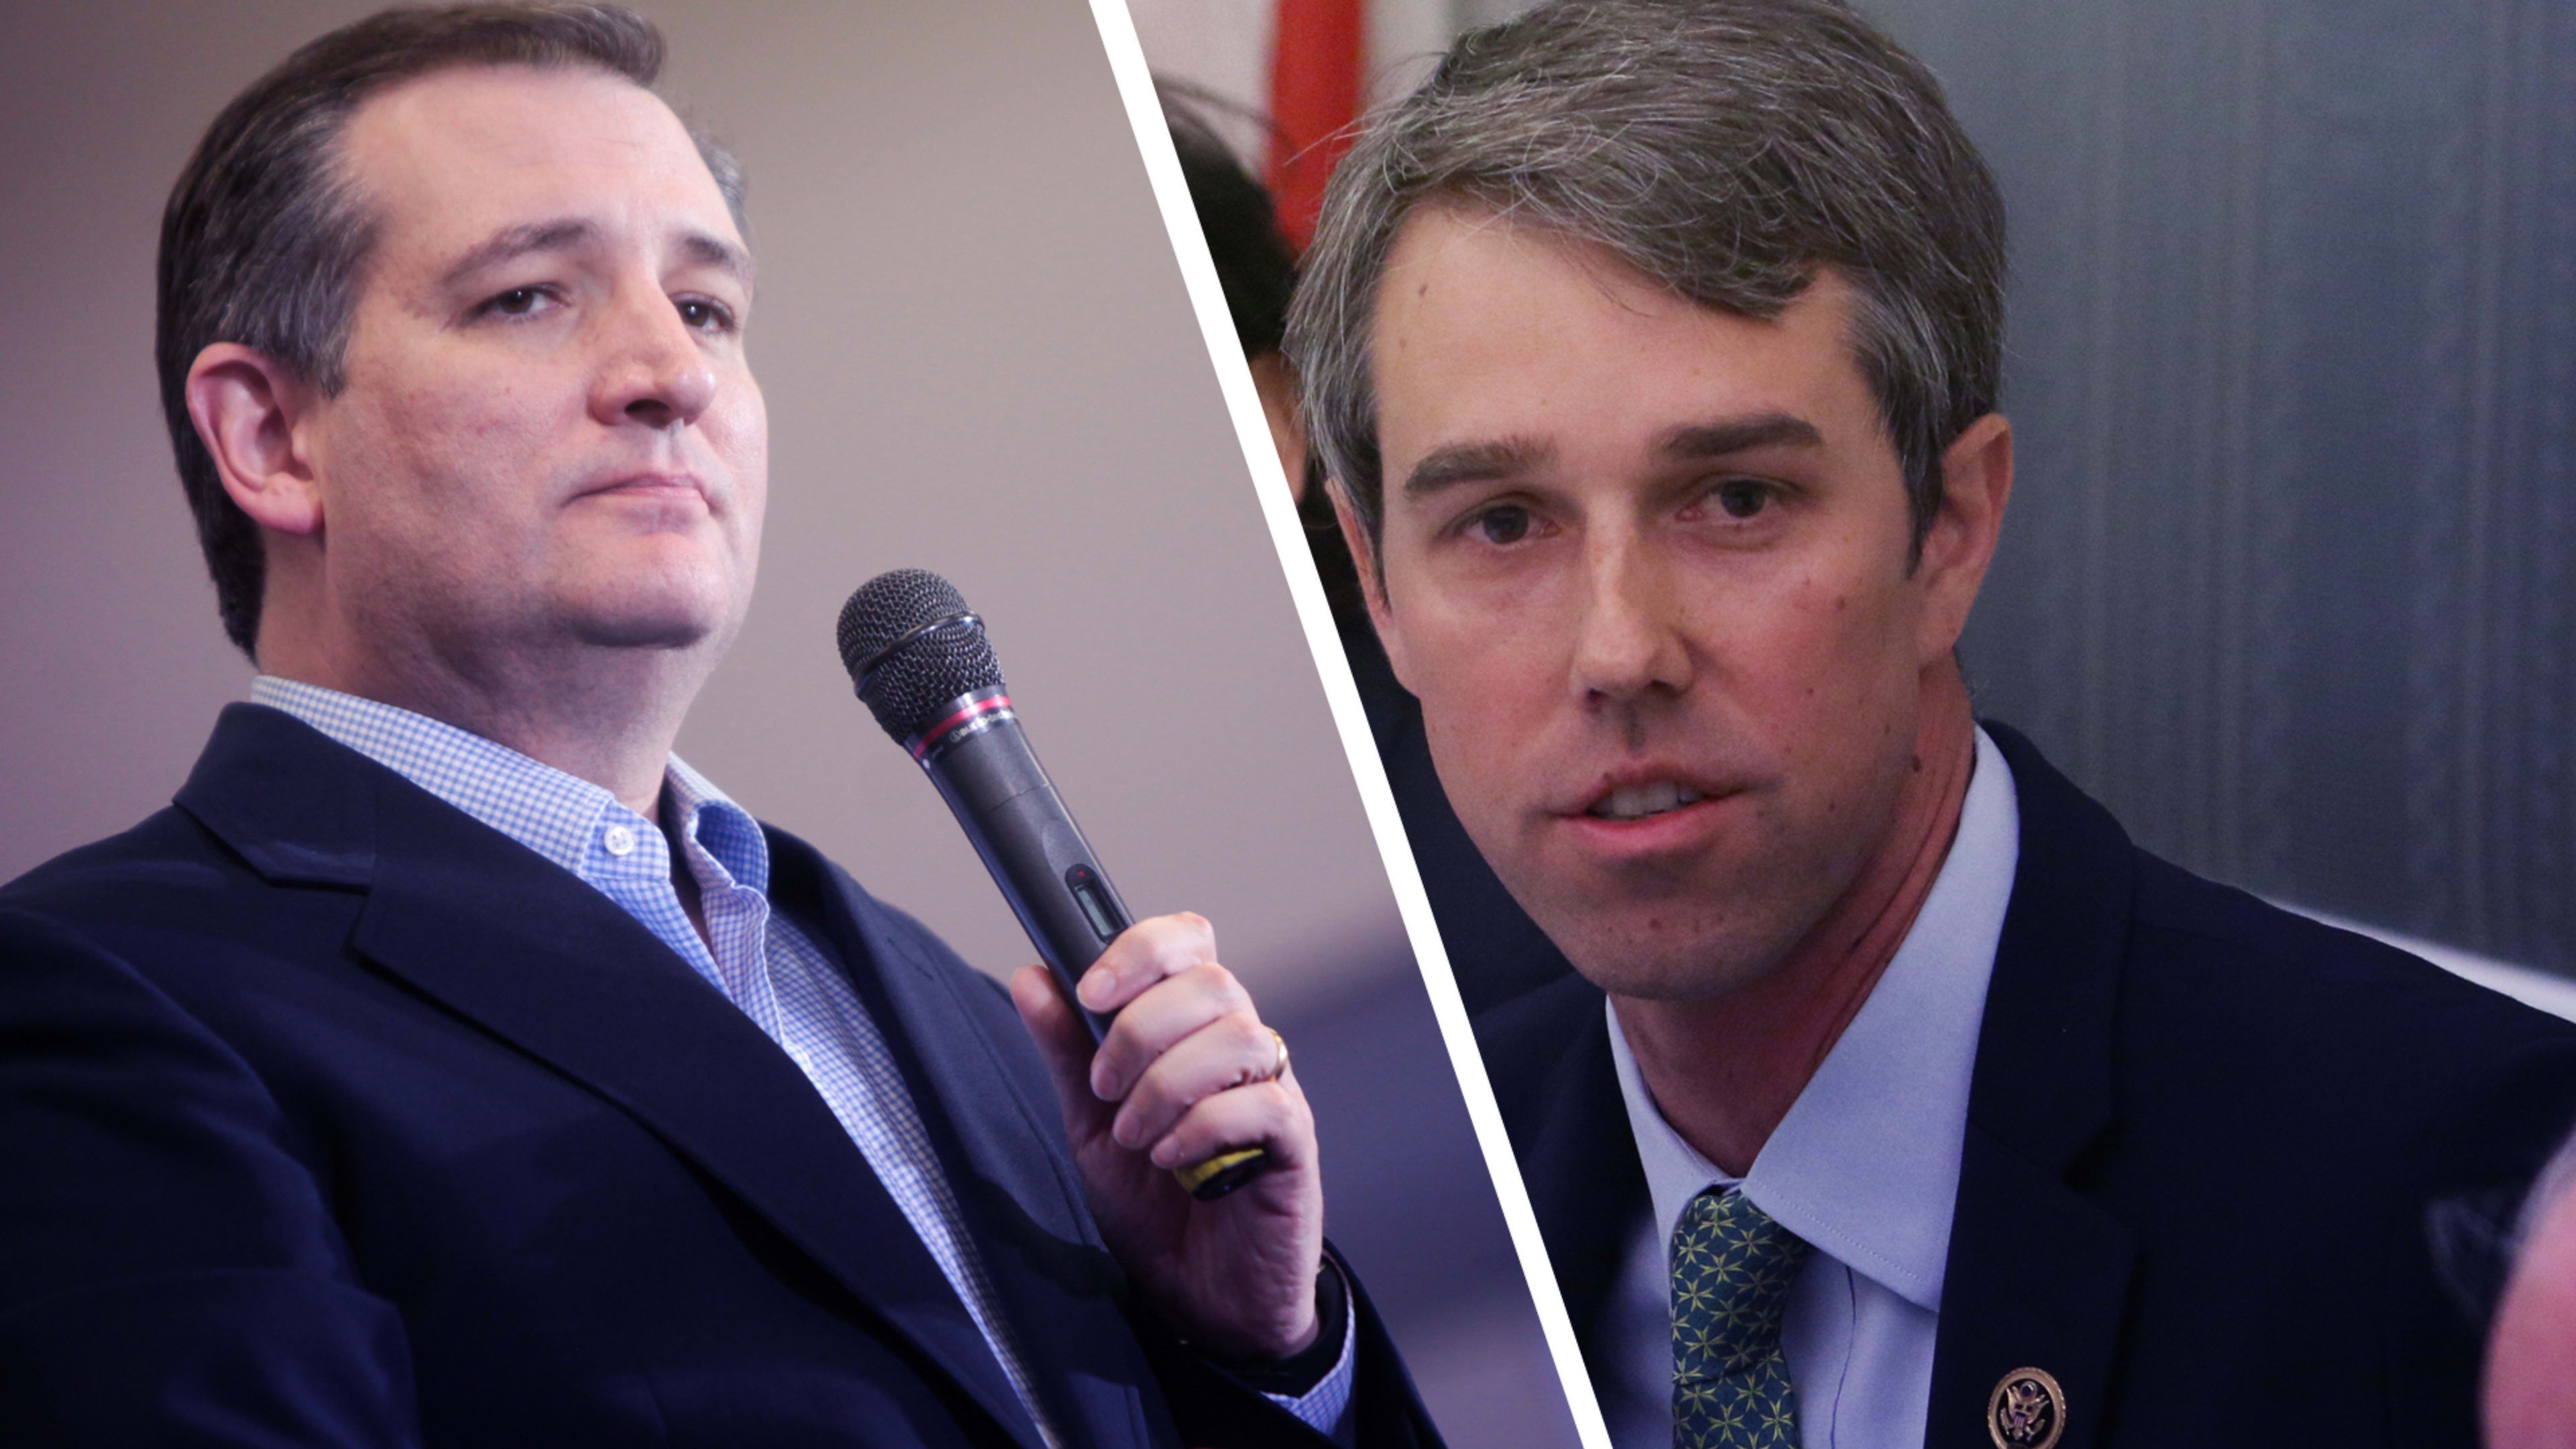 Ted Cruz–Beto O’Rourke debate: How to watch live online without a TV